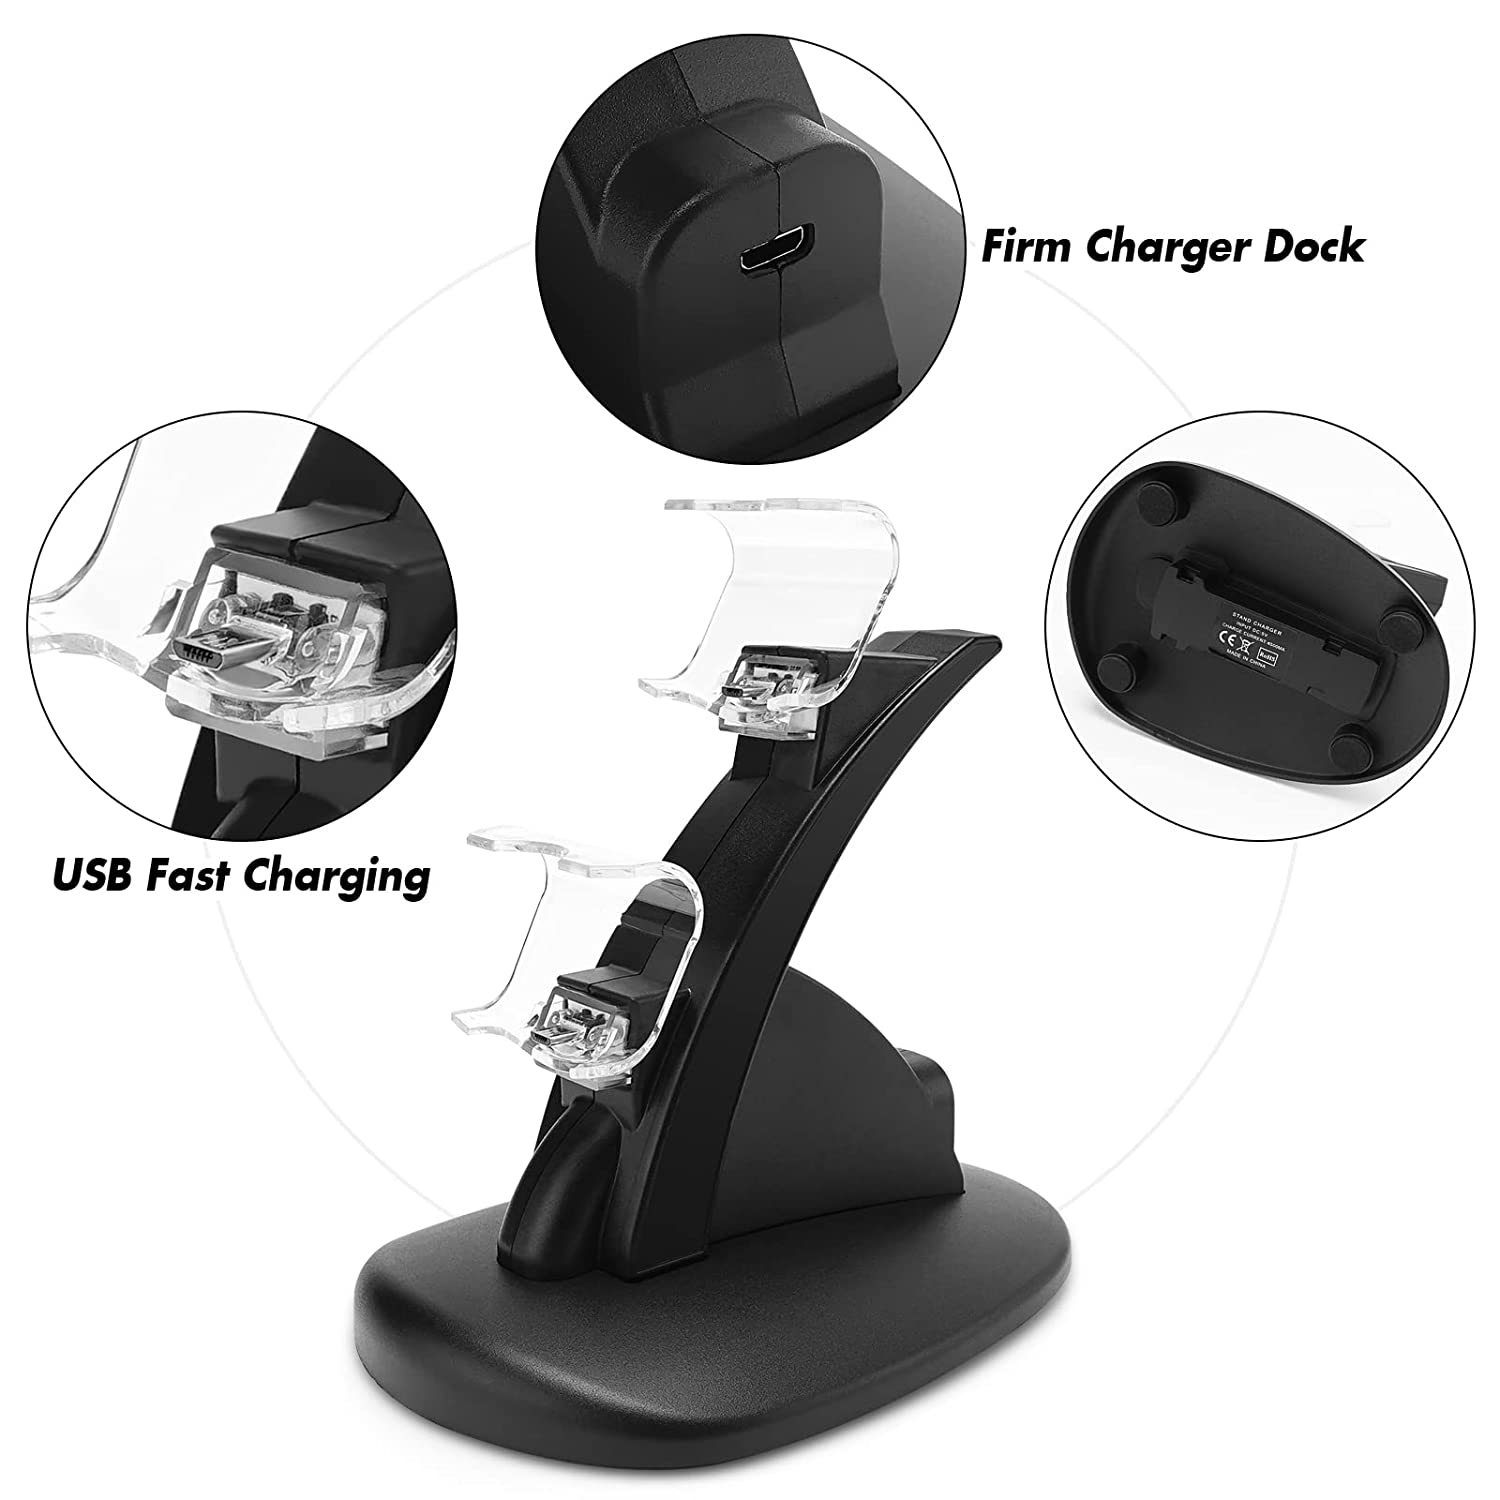 Playstation4 Regular Slim Pro Controller Charger, SUNKY LED Gaming Console Charging Stand USB Dock Station Mount Cradle for Sony PS4